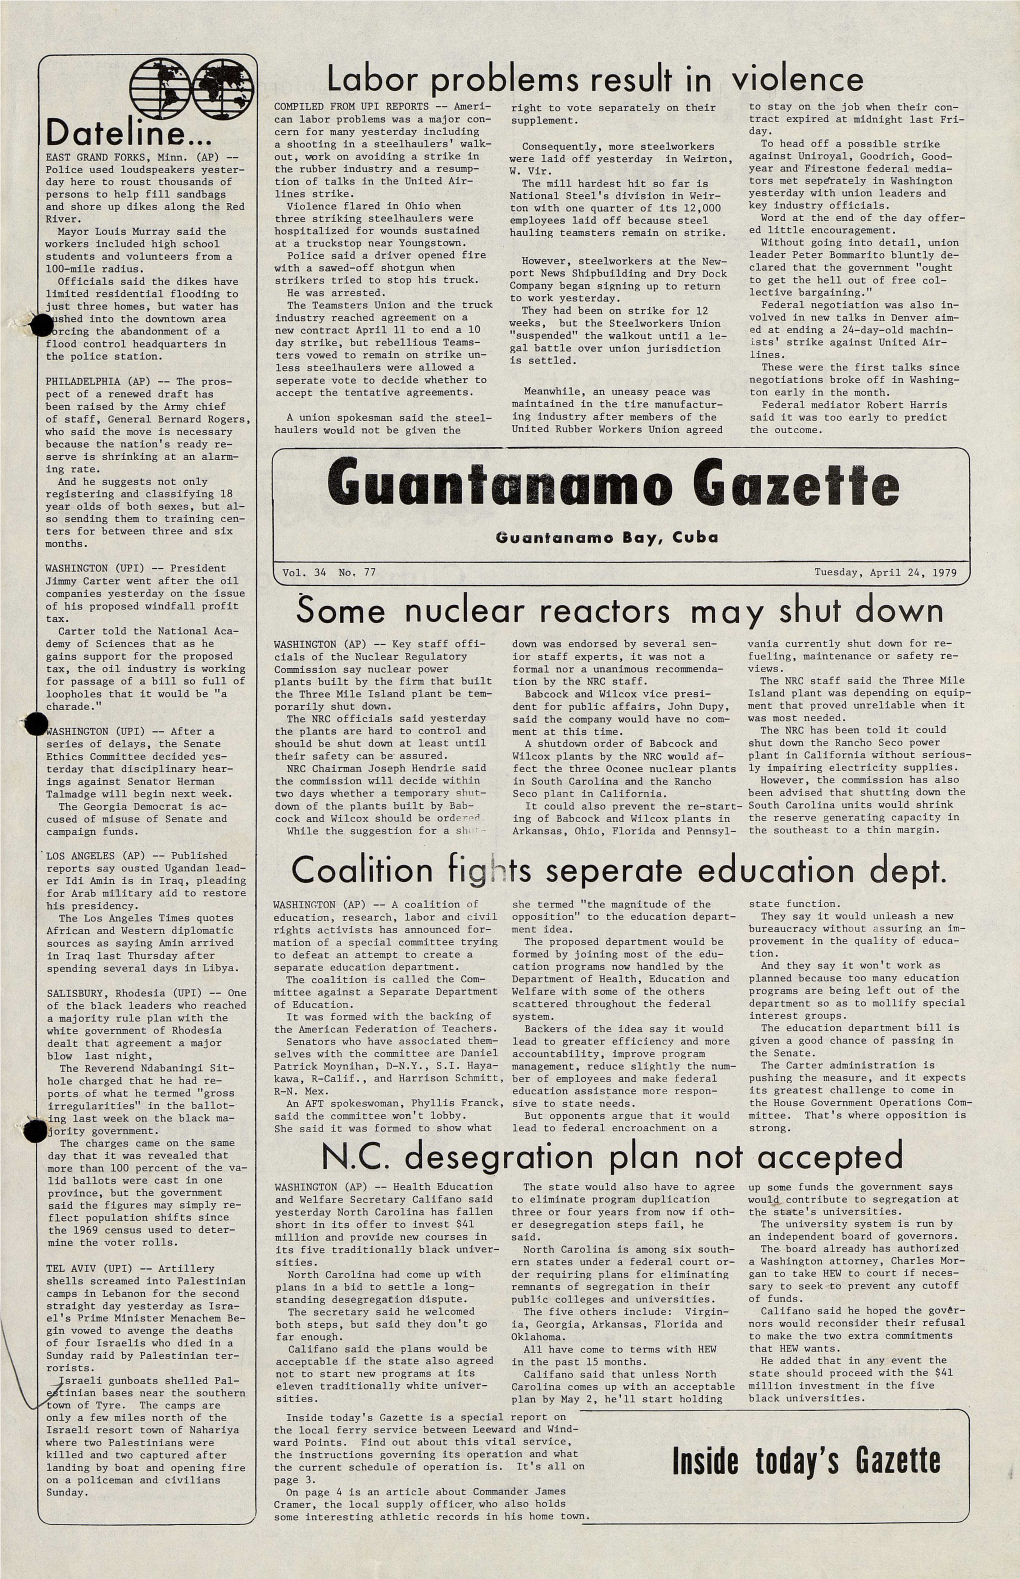 Guantanamo Gazette So Sending Them to Training Cen- Ters for Between Three and Six Months